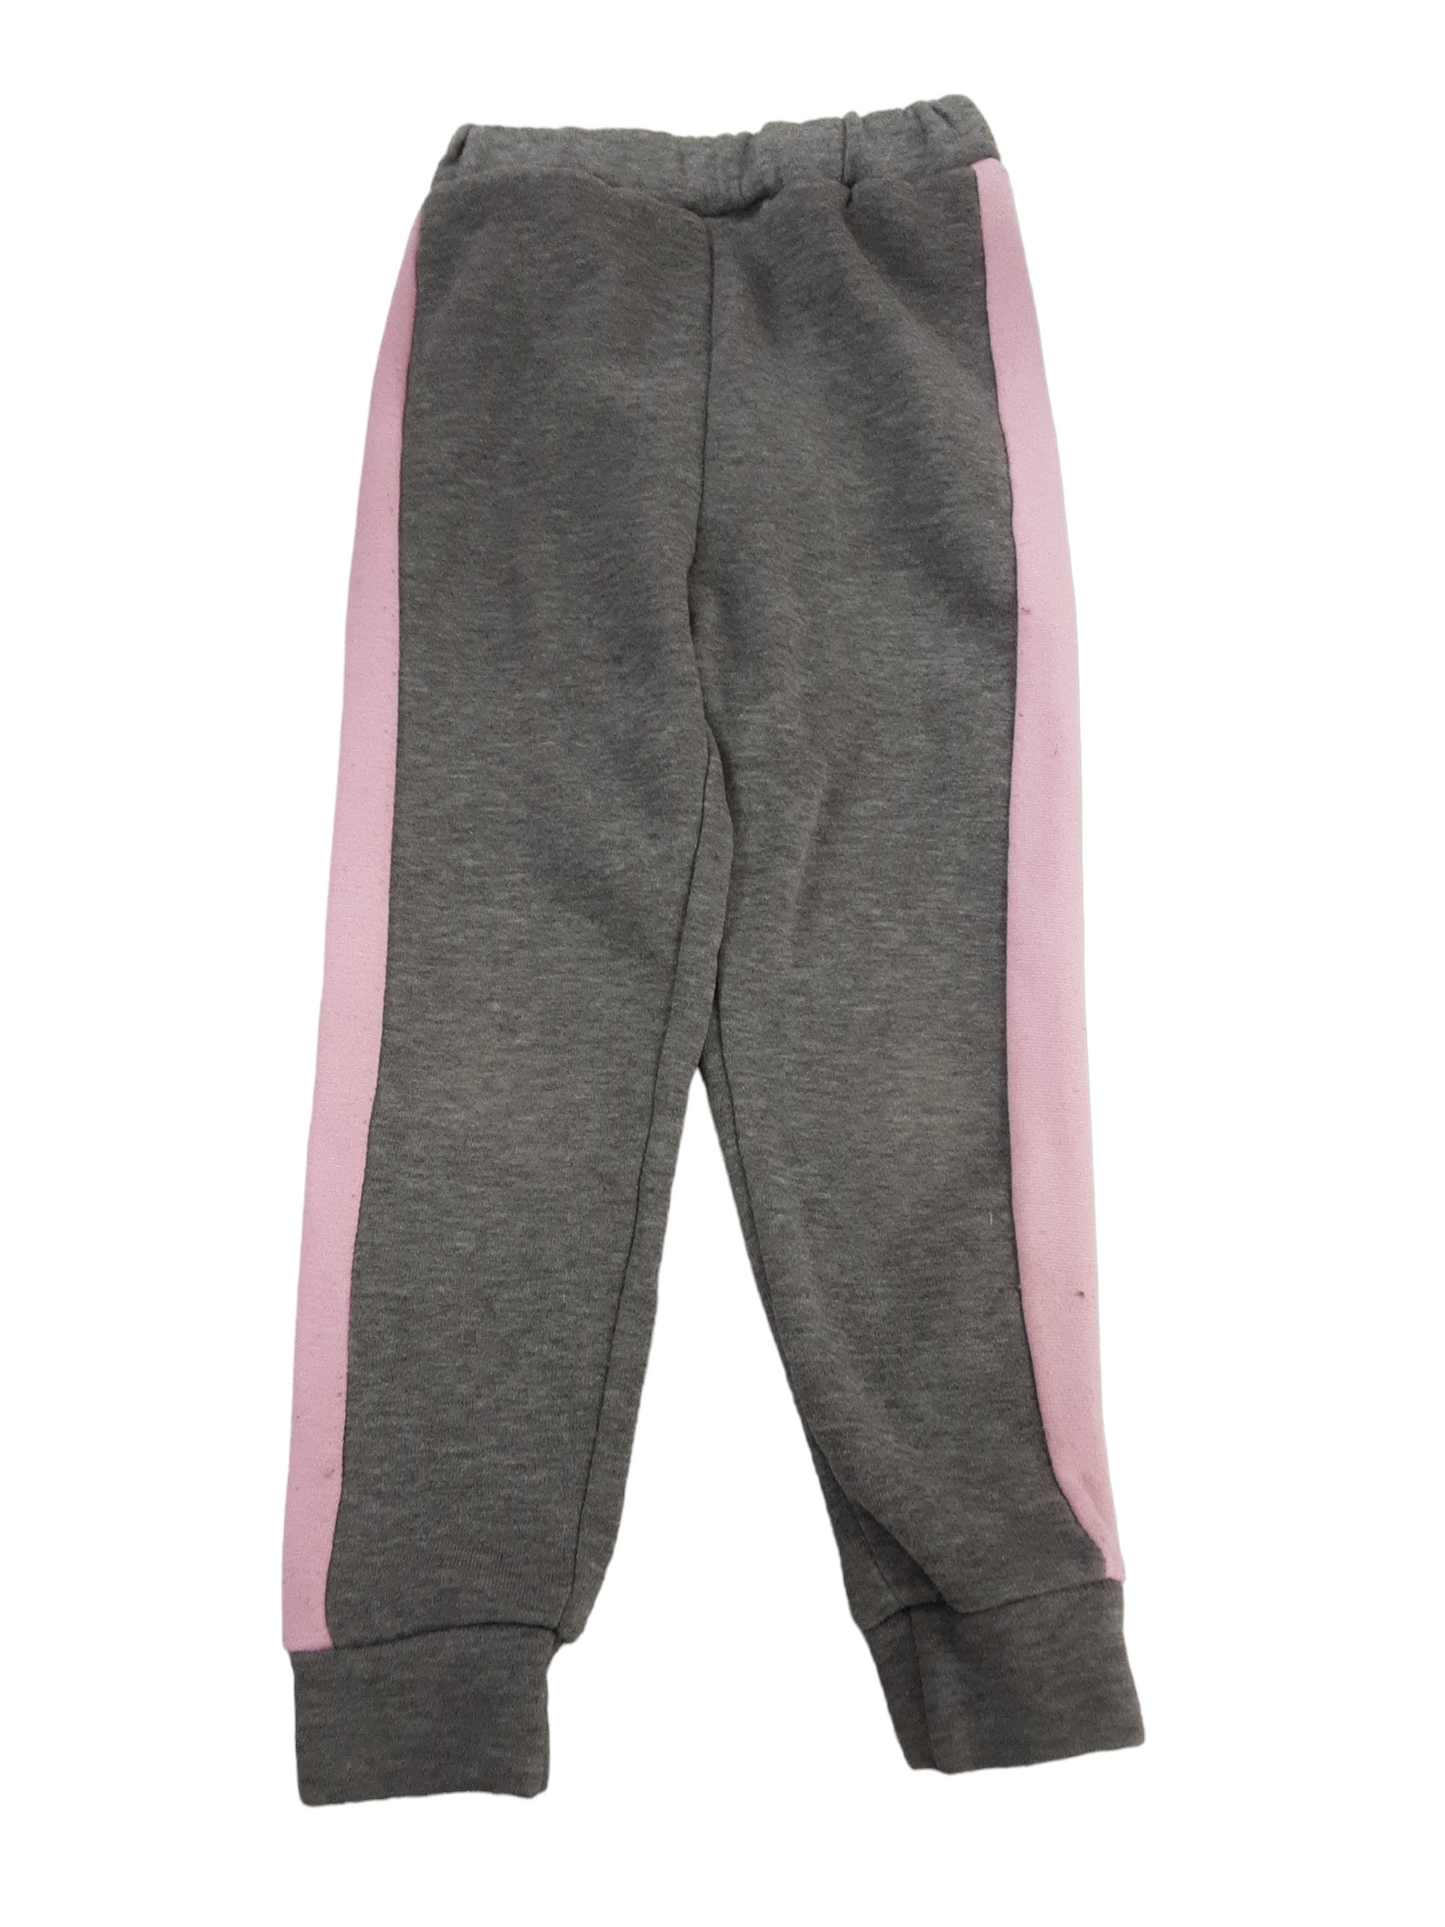 Grey with pink joggers size 2-3 yrs